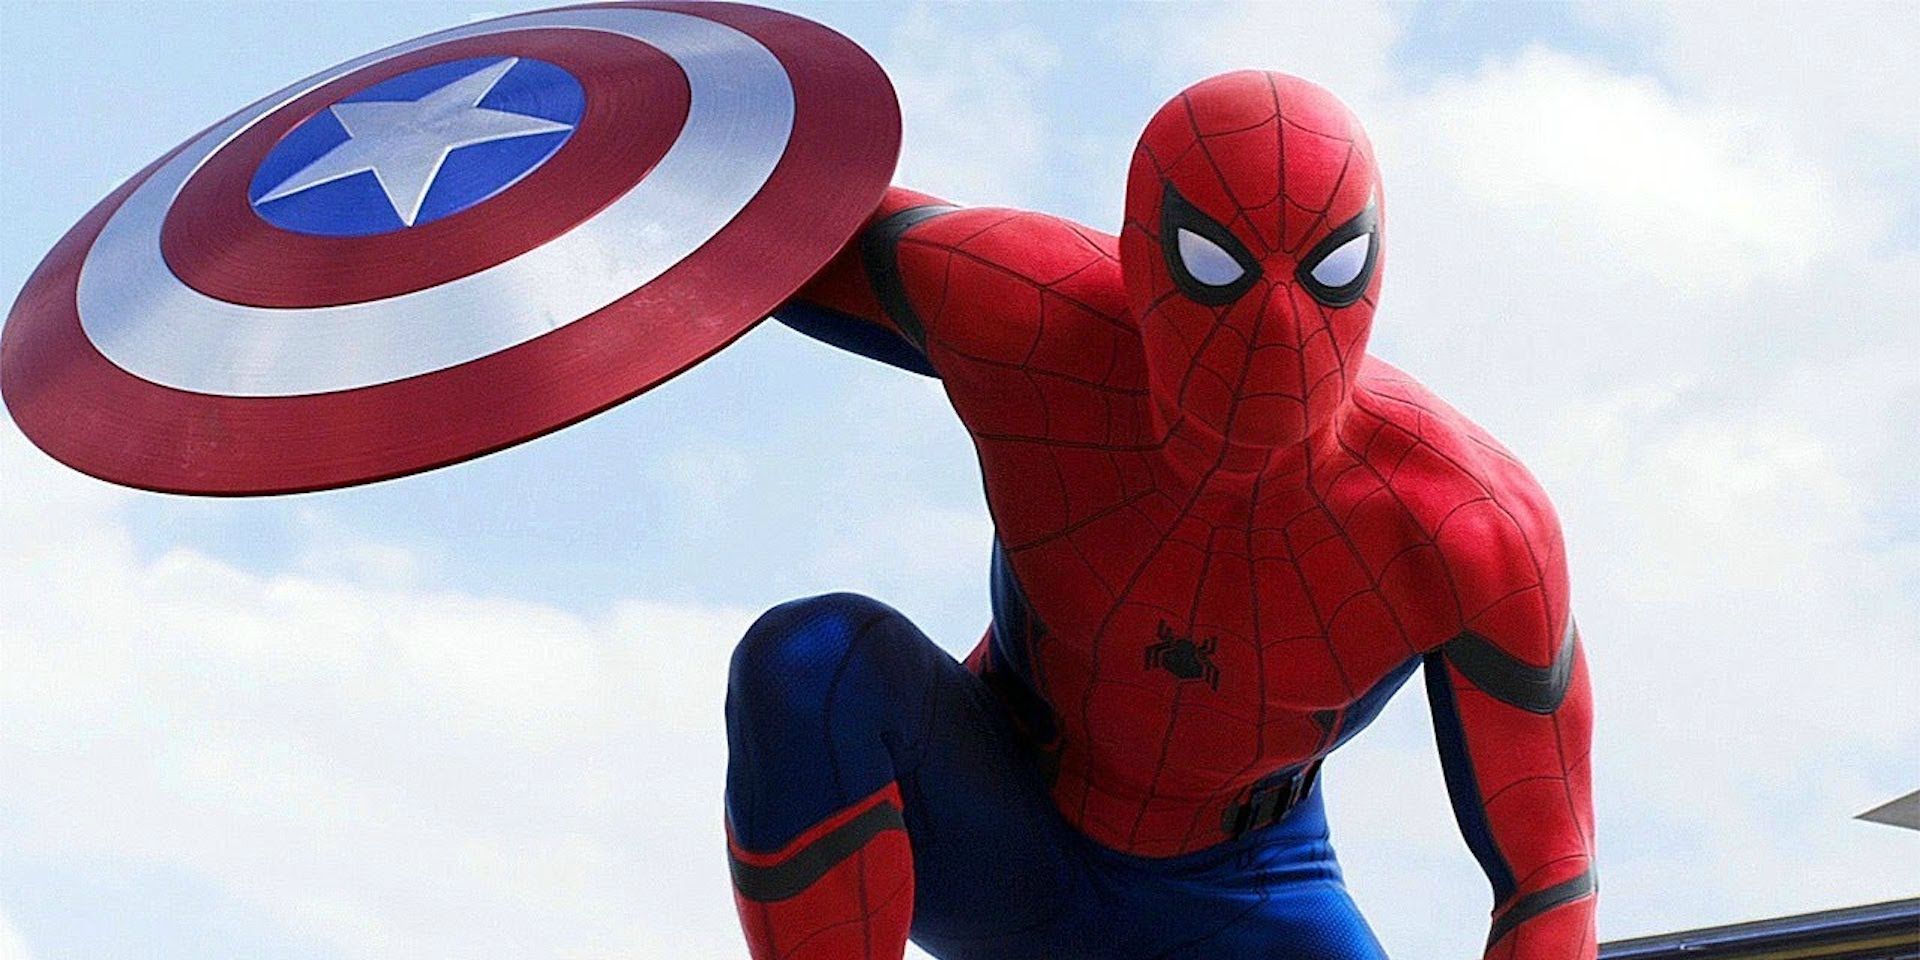 Tom Holland as Spider-Man with Shield in Captain America Civil War